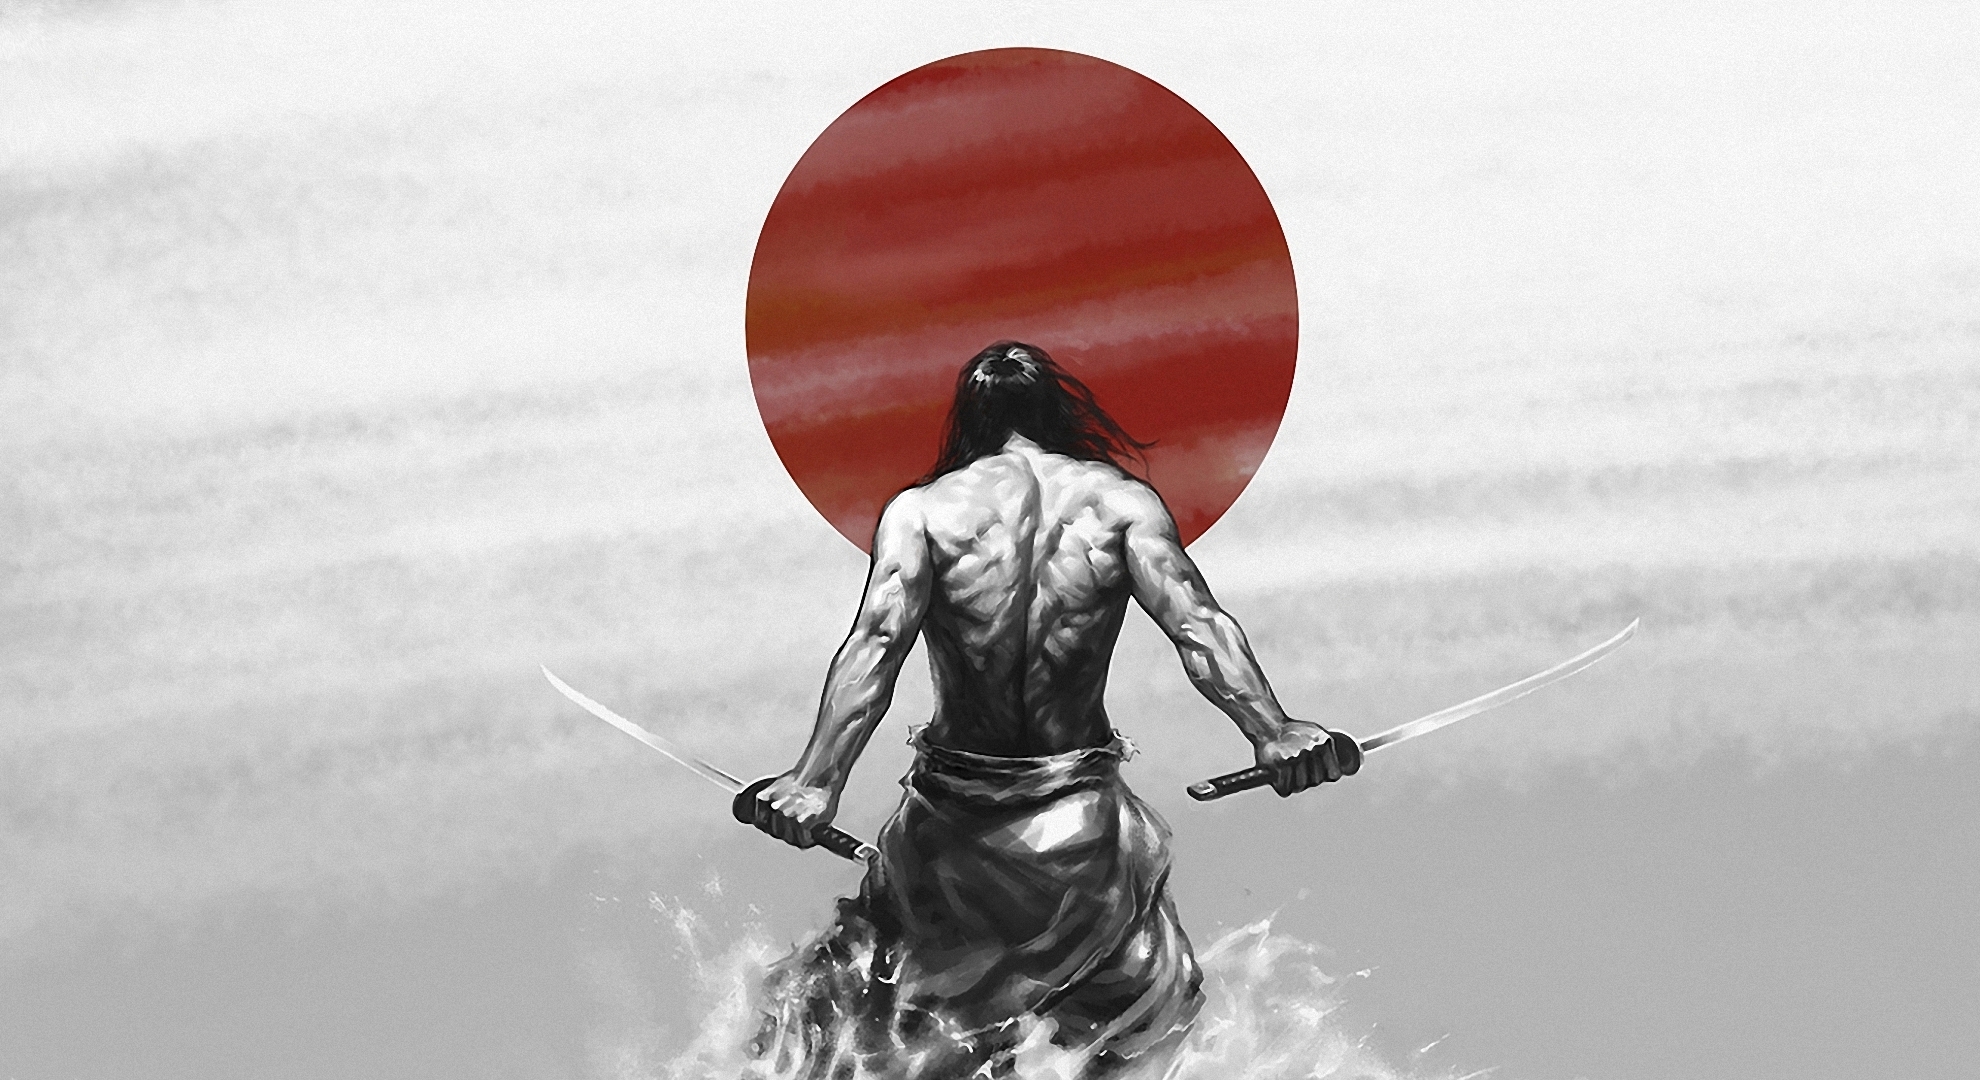 Free Download Samurai Wallpapers Boosey Warrior Courage Courage 1980x1080 For Your Desktop Mobile Tablet Explore 45 Hd Samurai Wallpaper Samurai Jack Wallpaper Afro Samurai Wallpaper Hd Samurai Sword Wallpaper